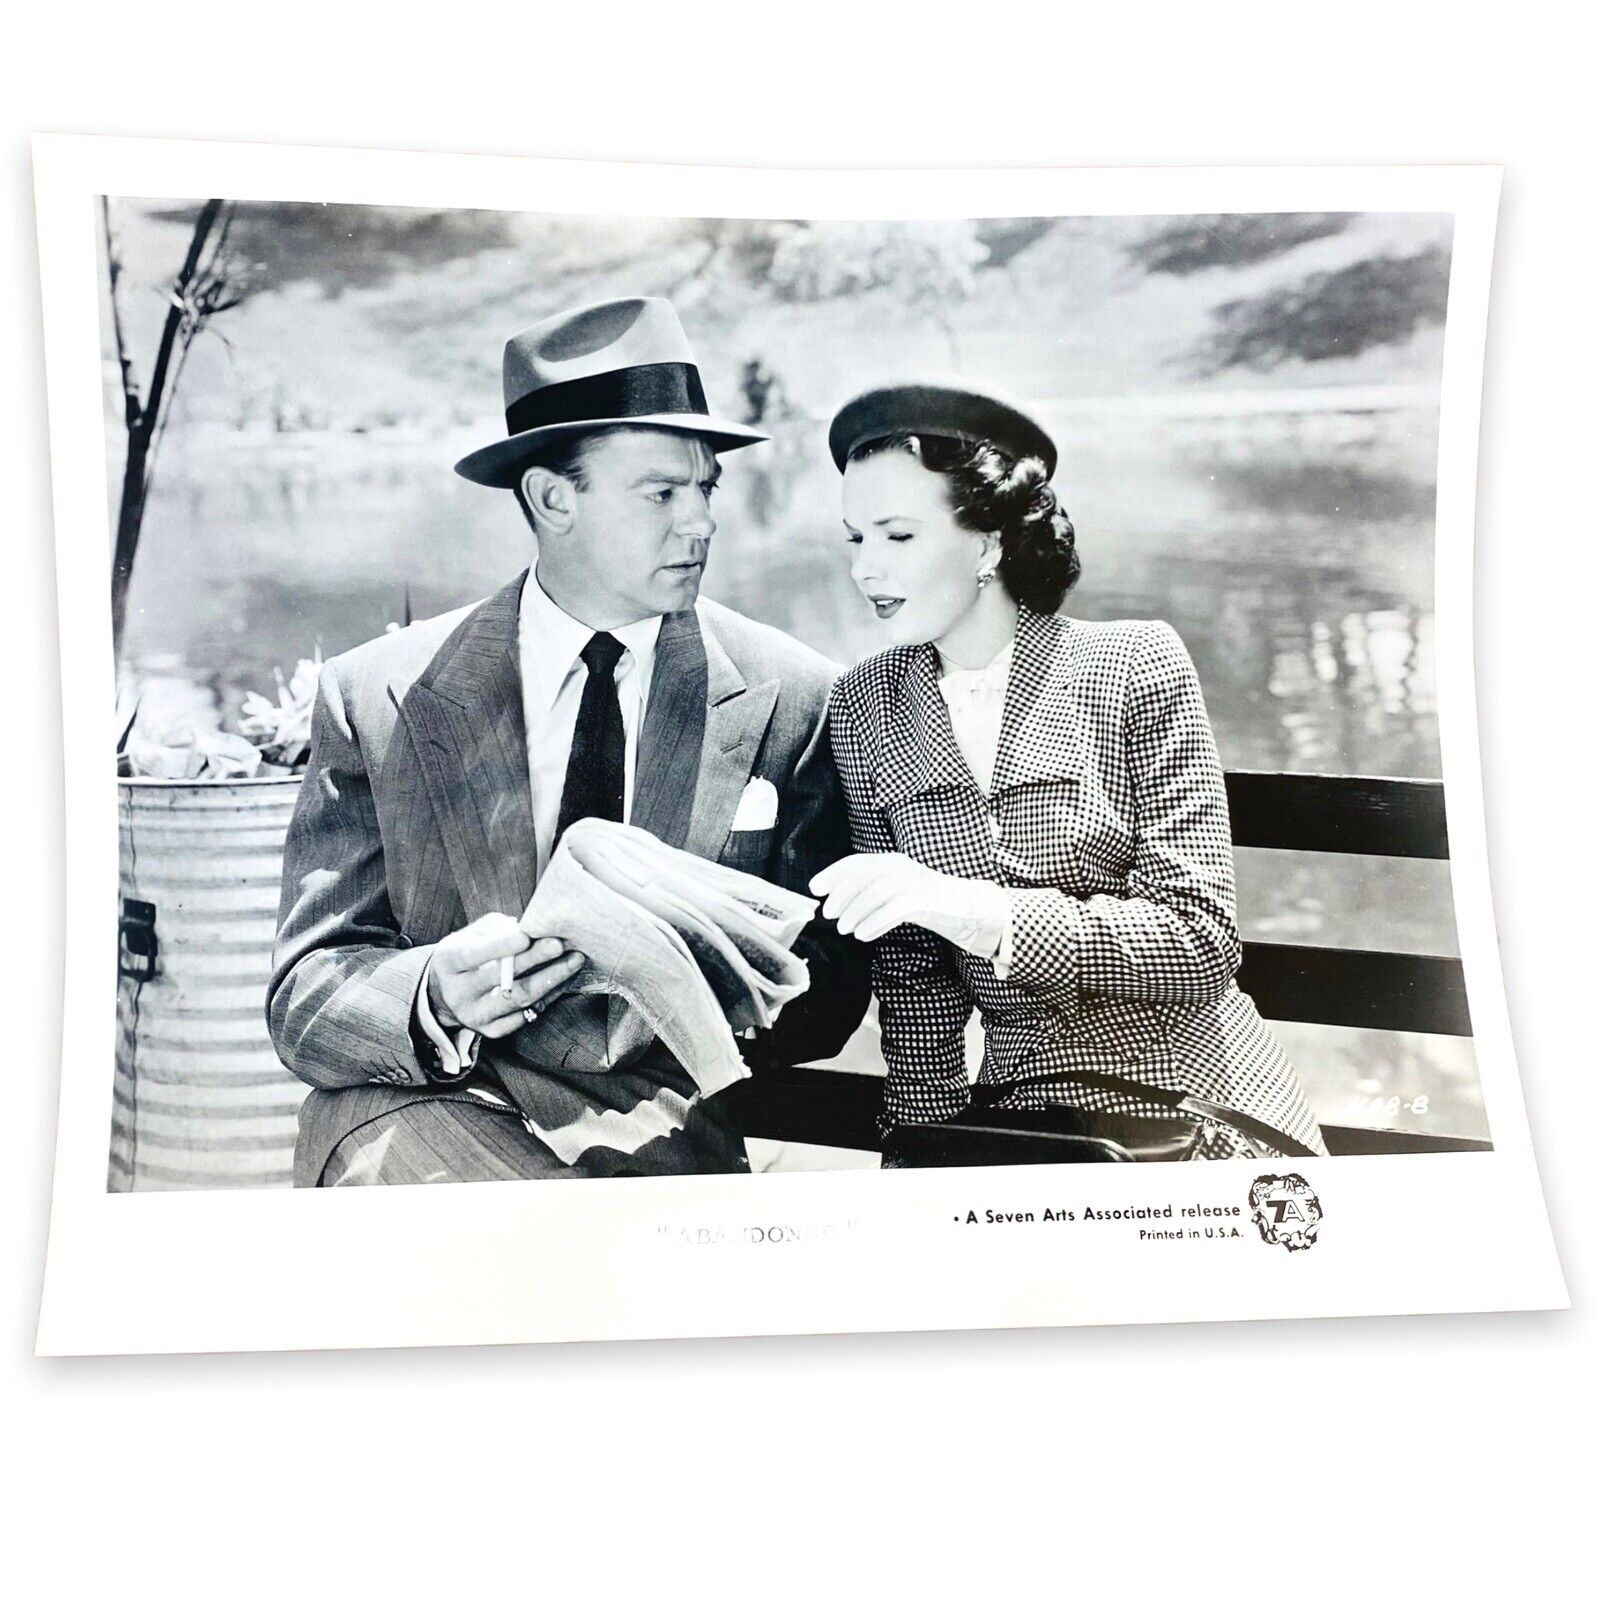 Abandoned Movie Publicity Photo with Gale Storm Dennis O\'Keefe 1940s Era Stars